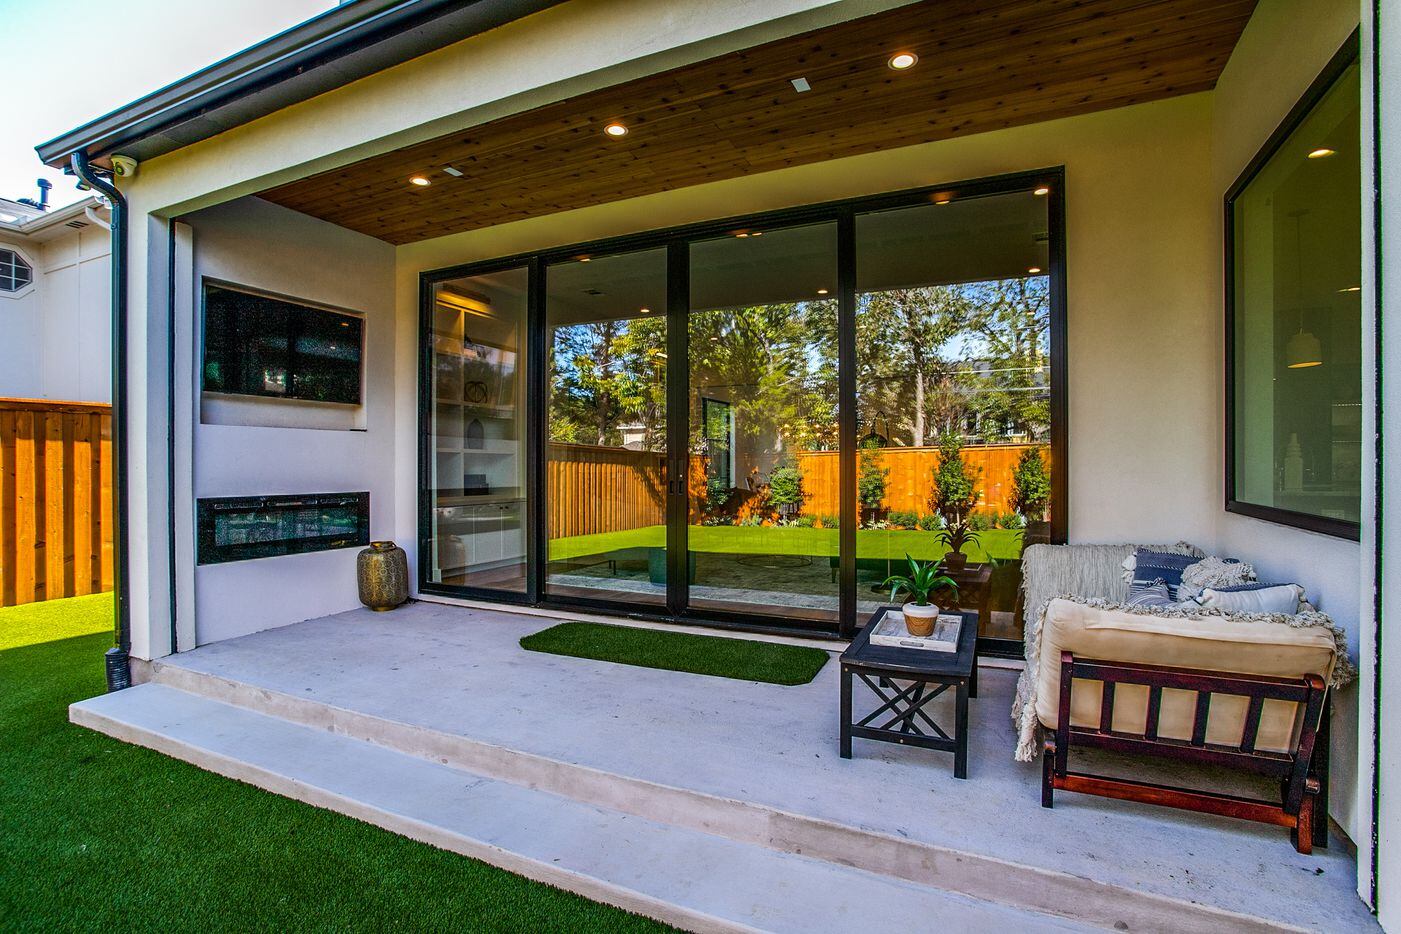 One of two covered patios features an outdoor television and a fireplace.